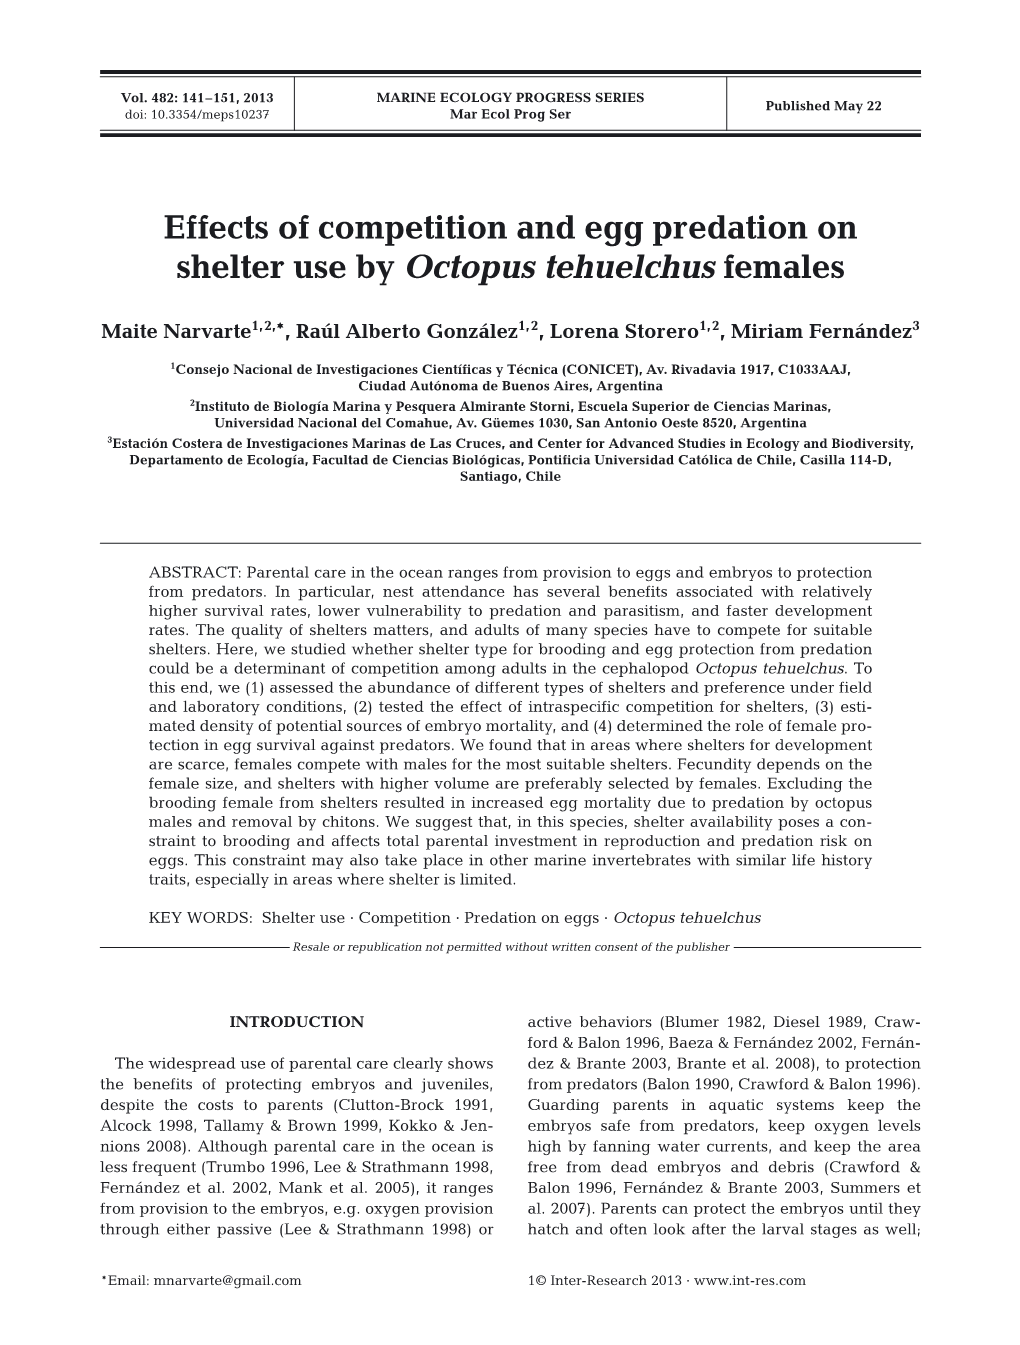 Effects of Competition and Egg Predation on Shelter Use by Octopus Tehuelchus Females